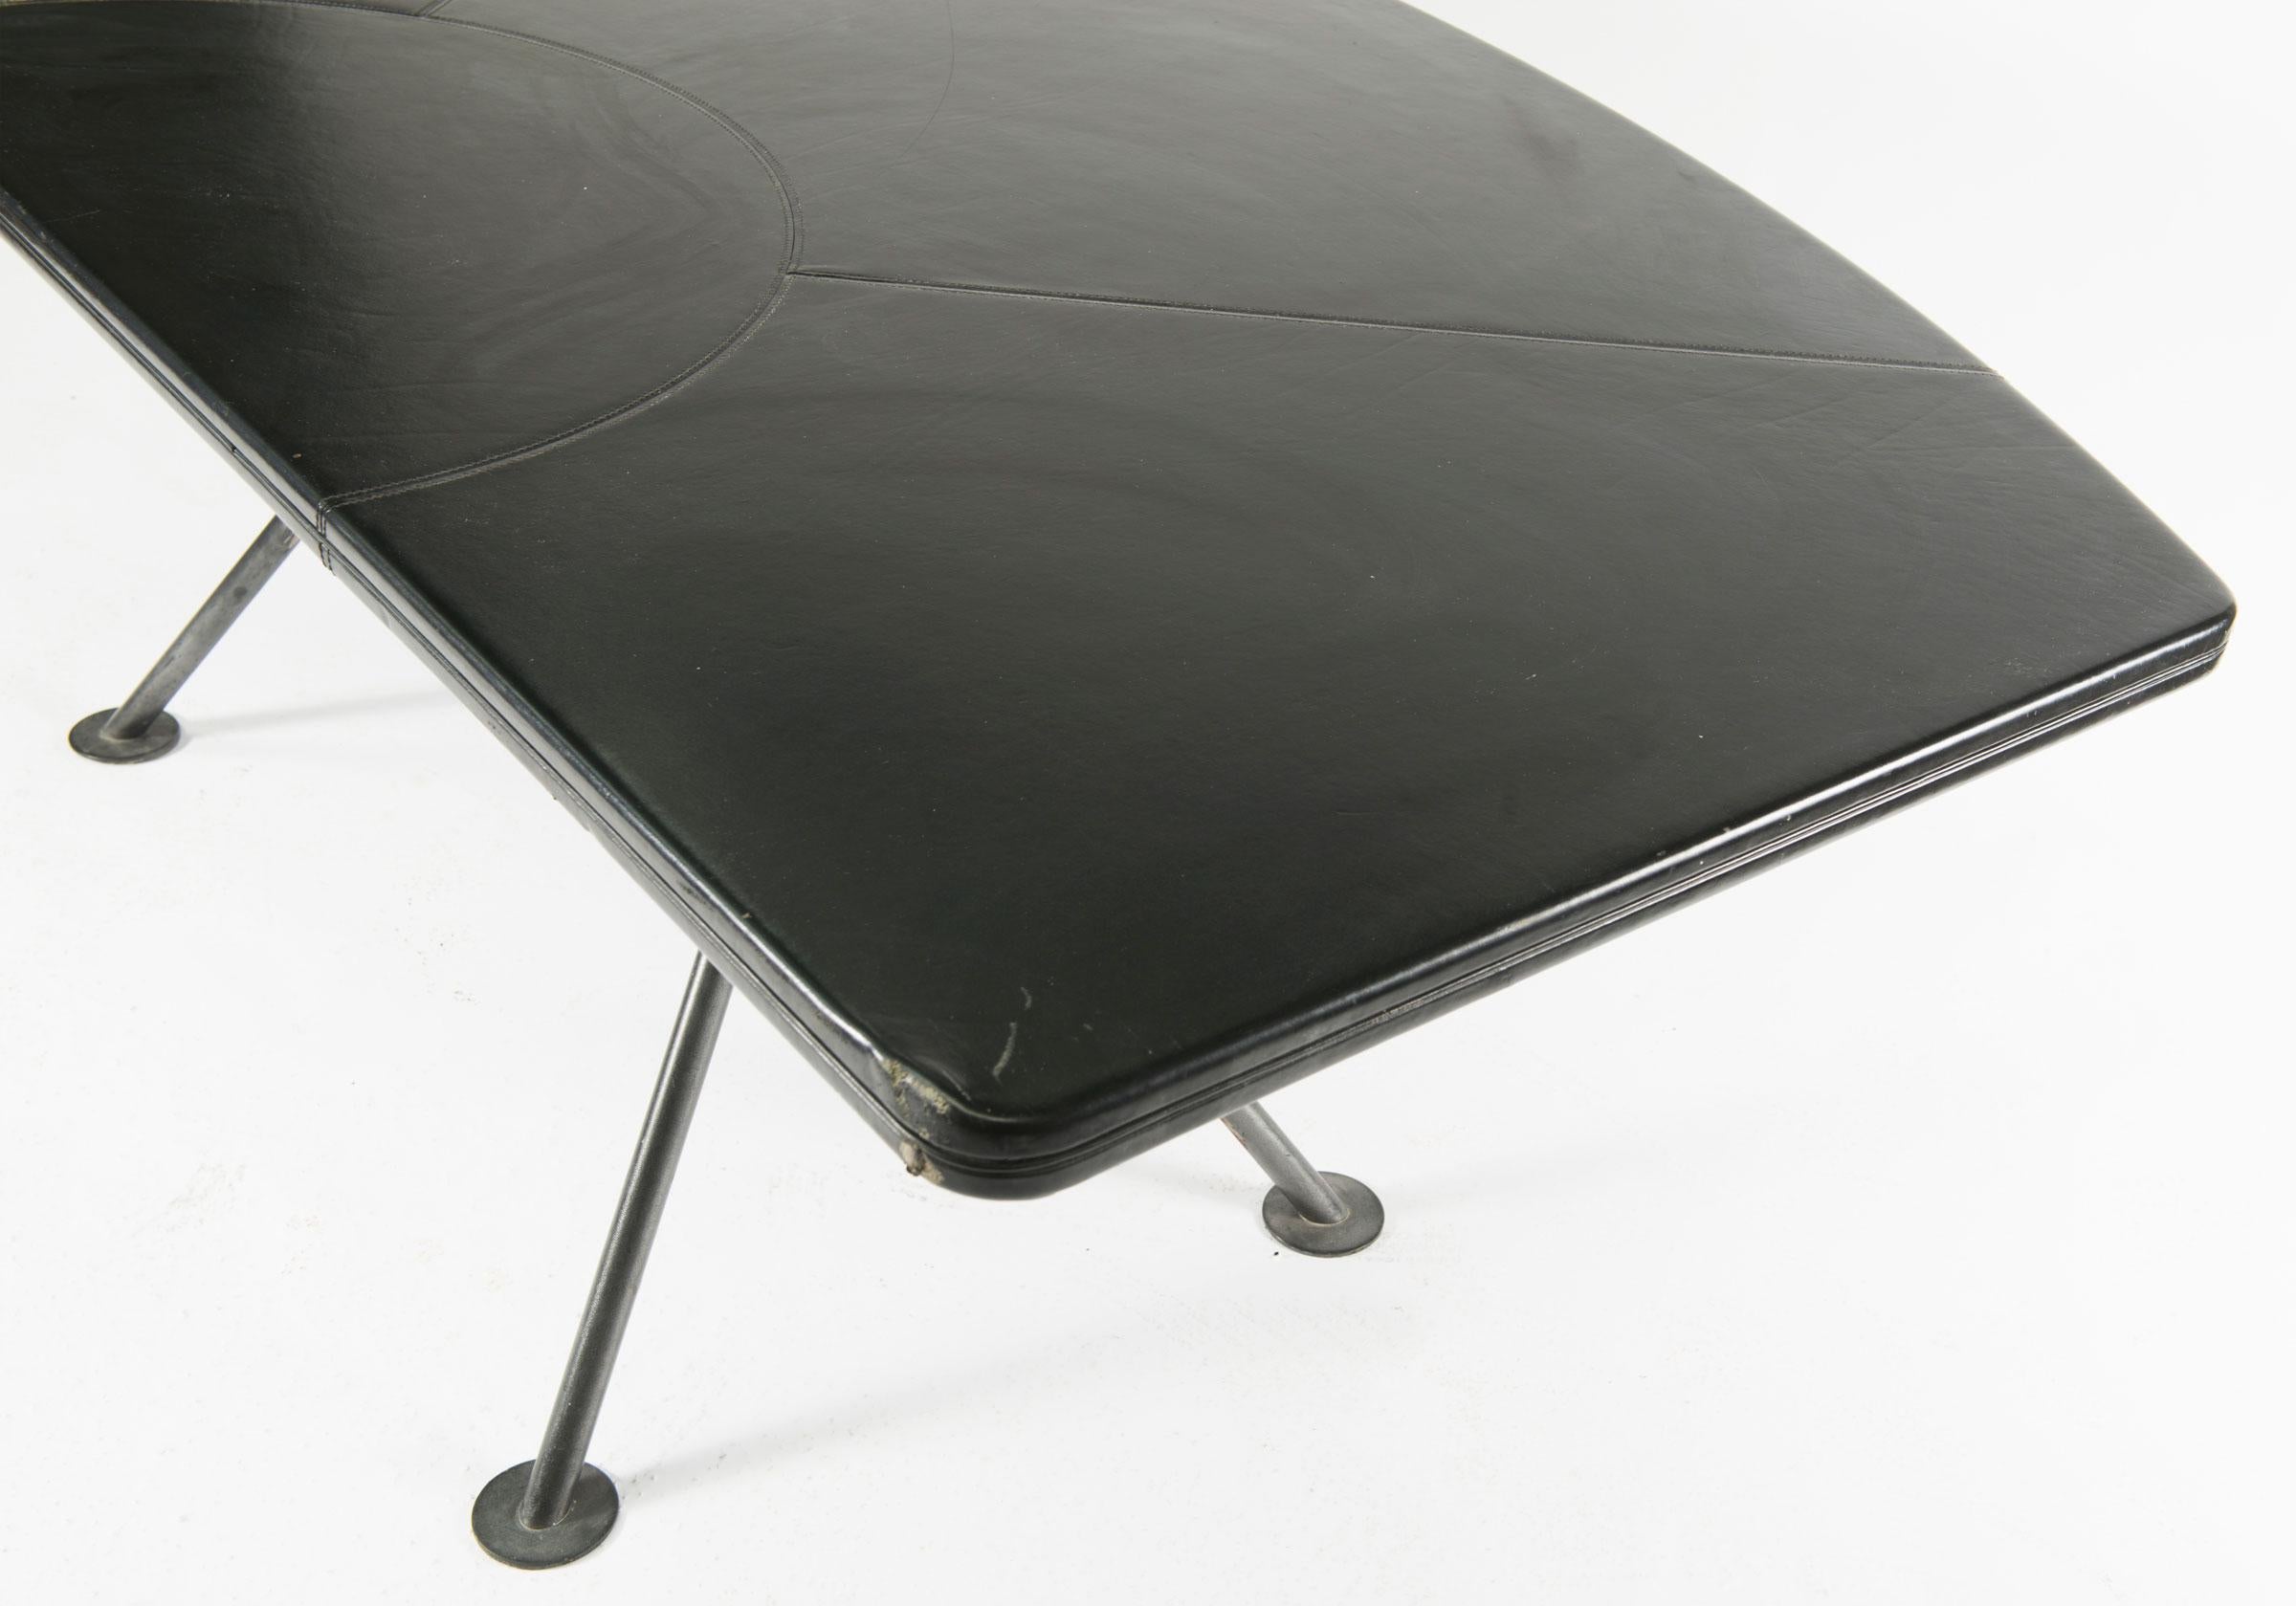 Leather Exclusive Designer Desk Sir Norman Foster Architecture School, 1980s For Sale